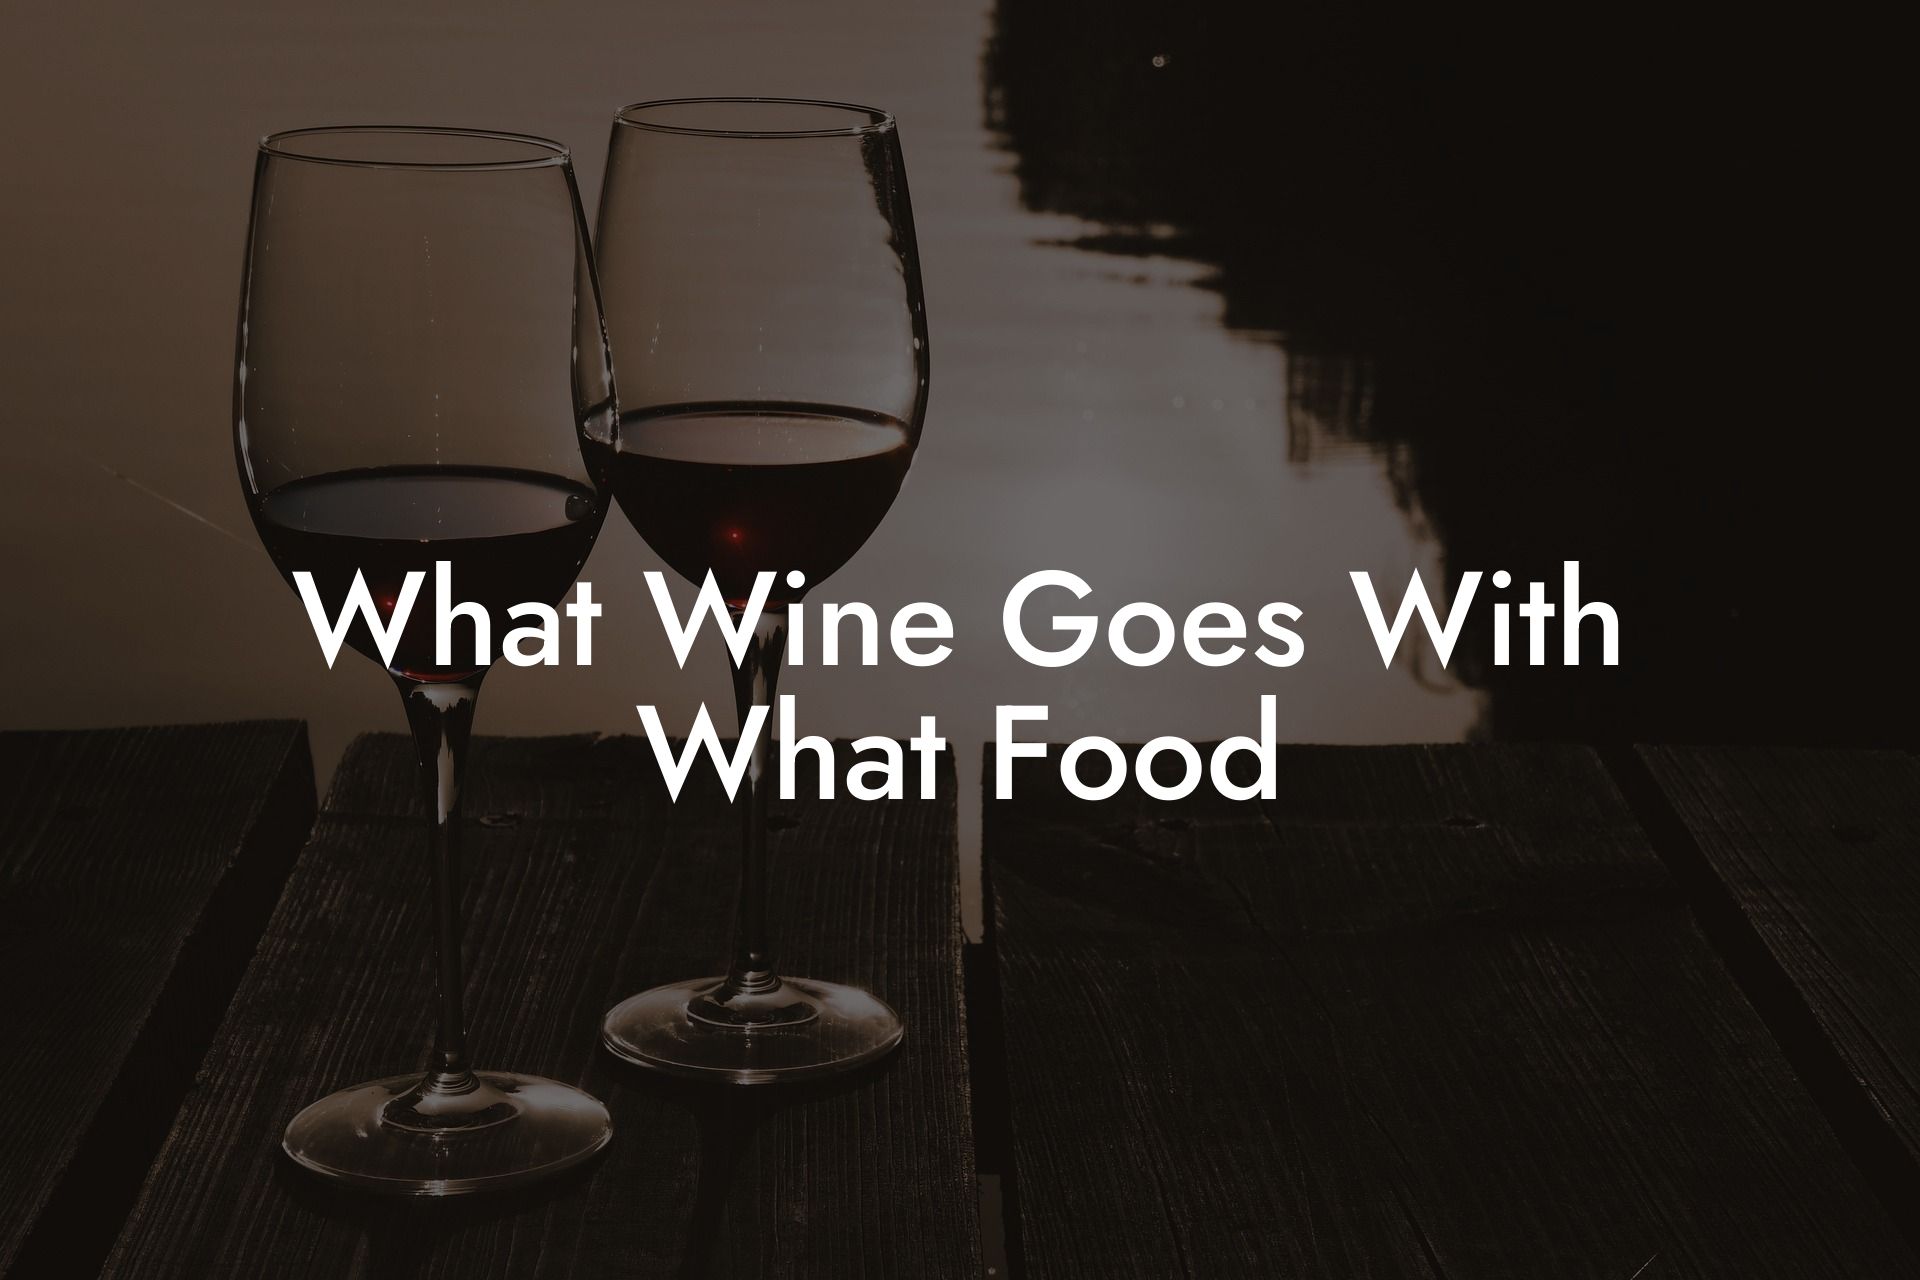 What Wine Goes With What Food